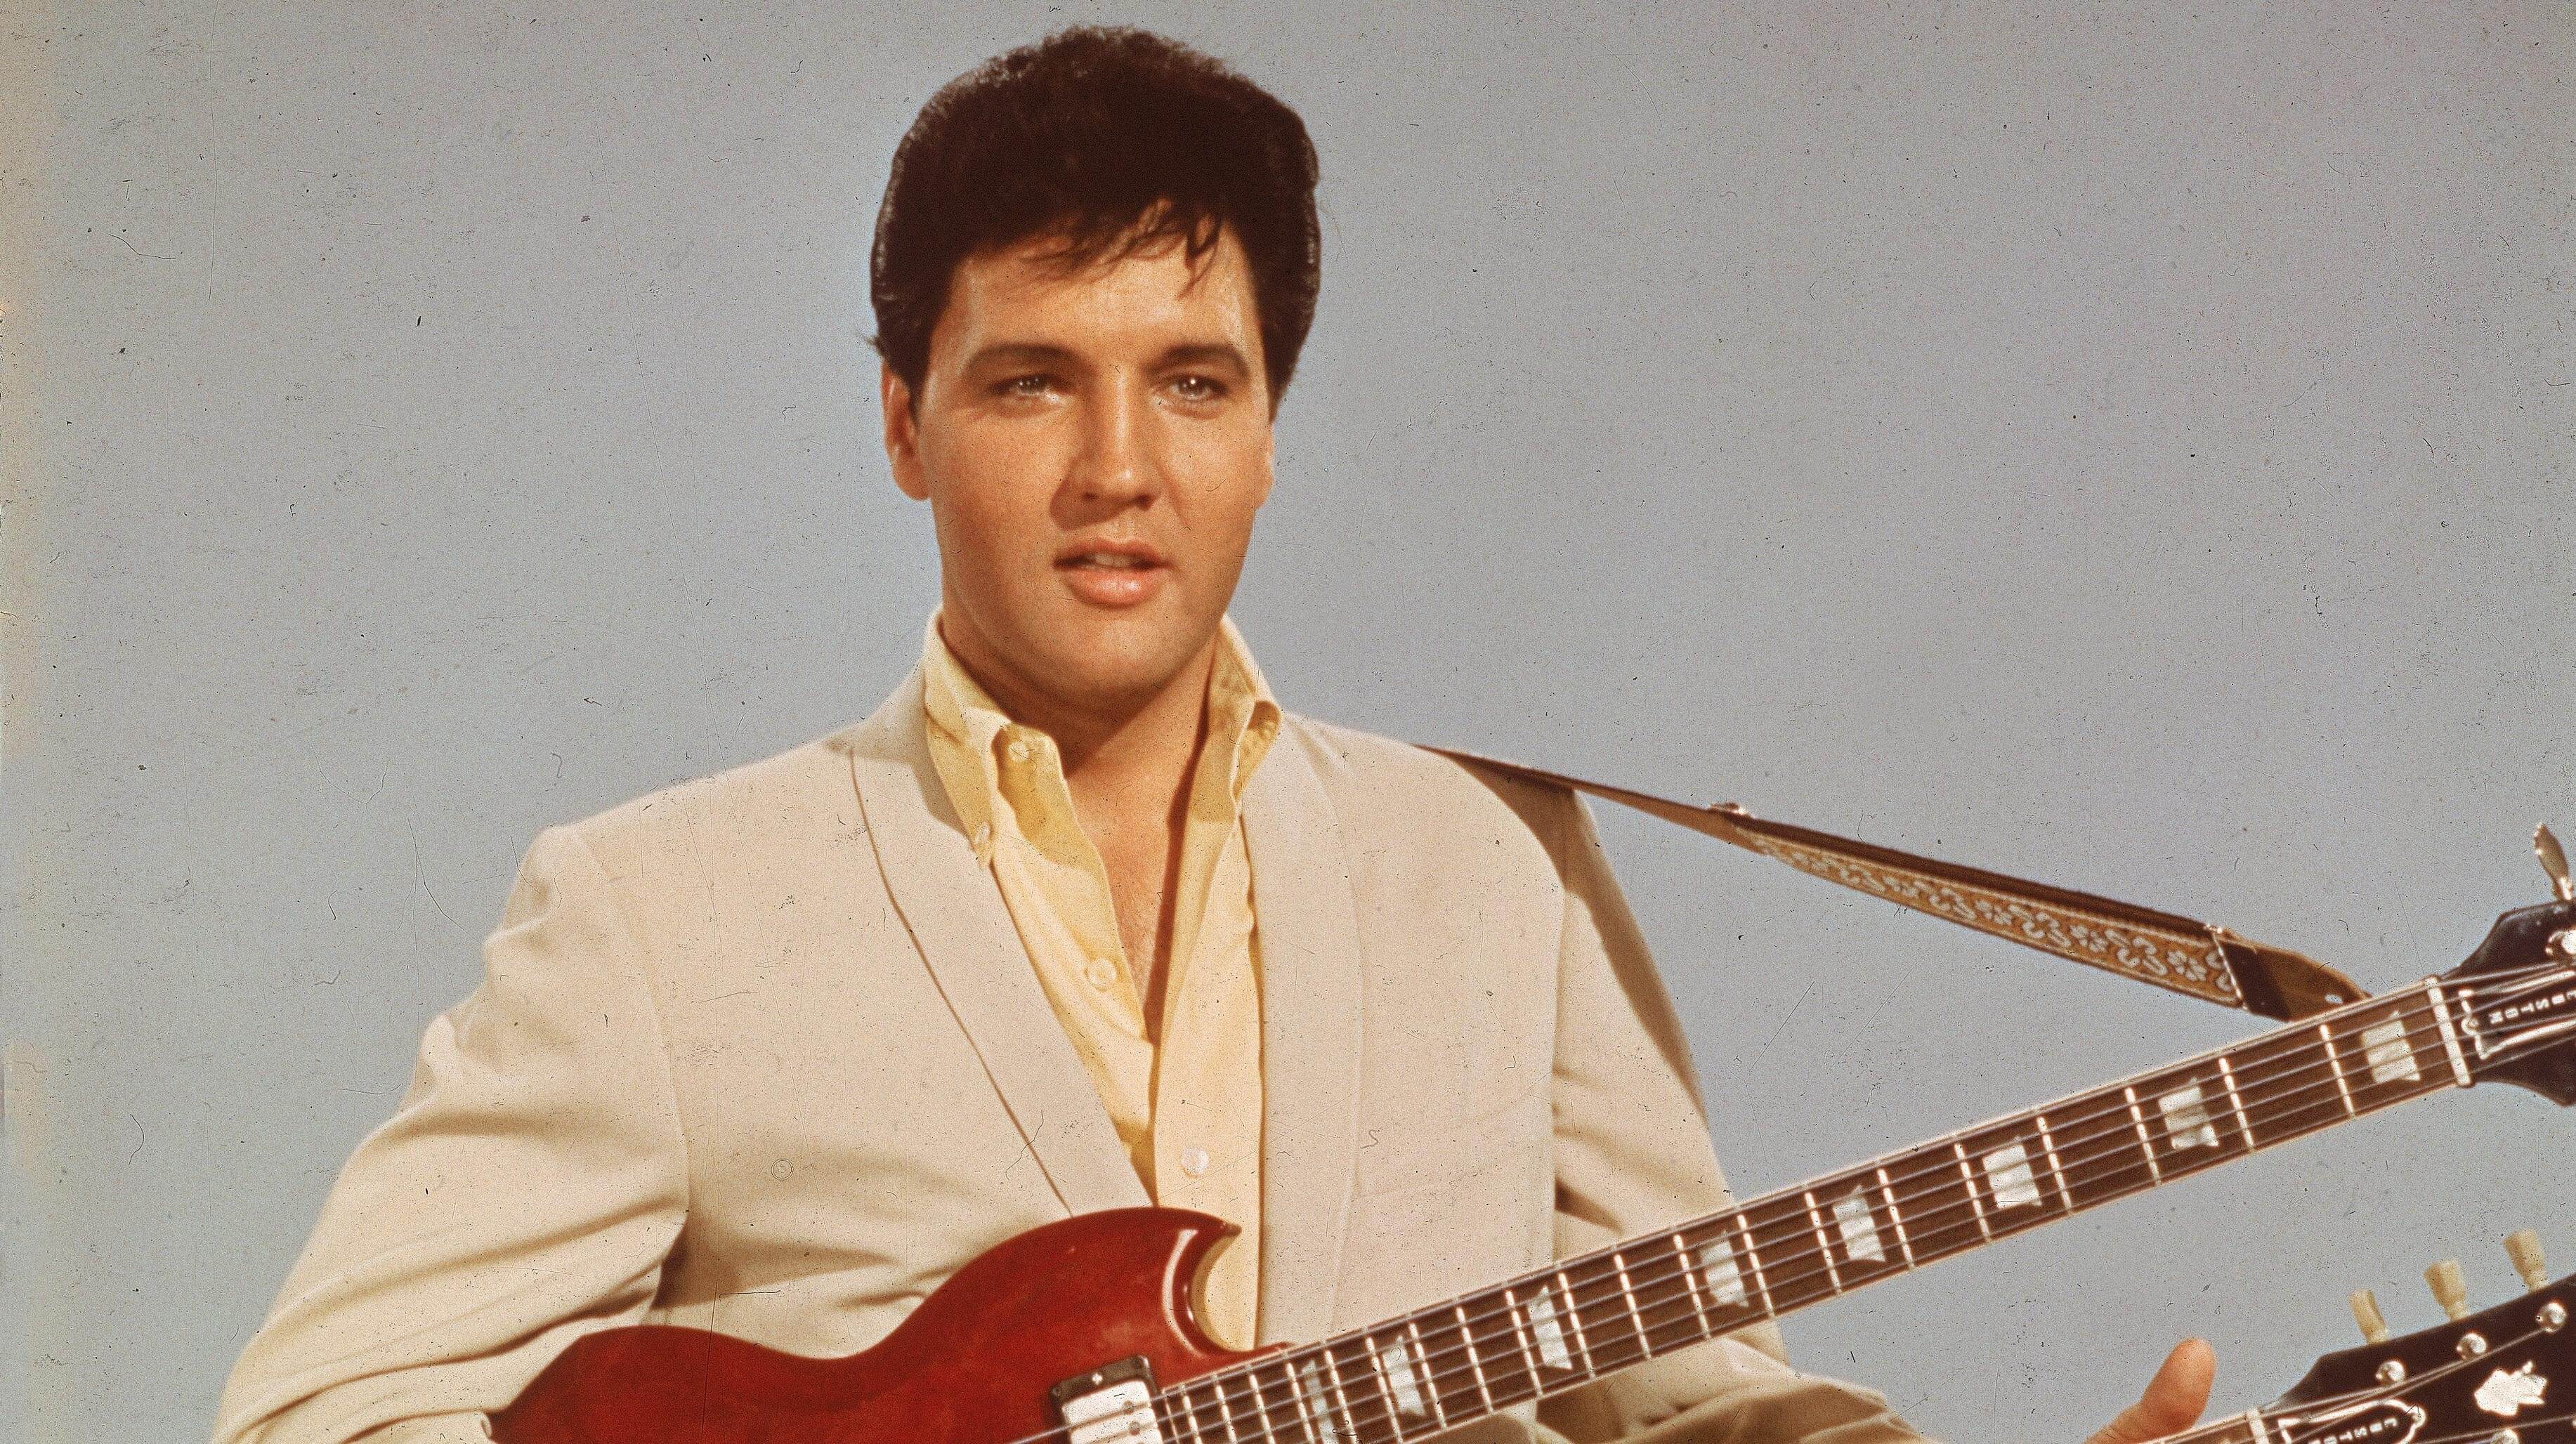 London is getting a holographic, AI Elvis